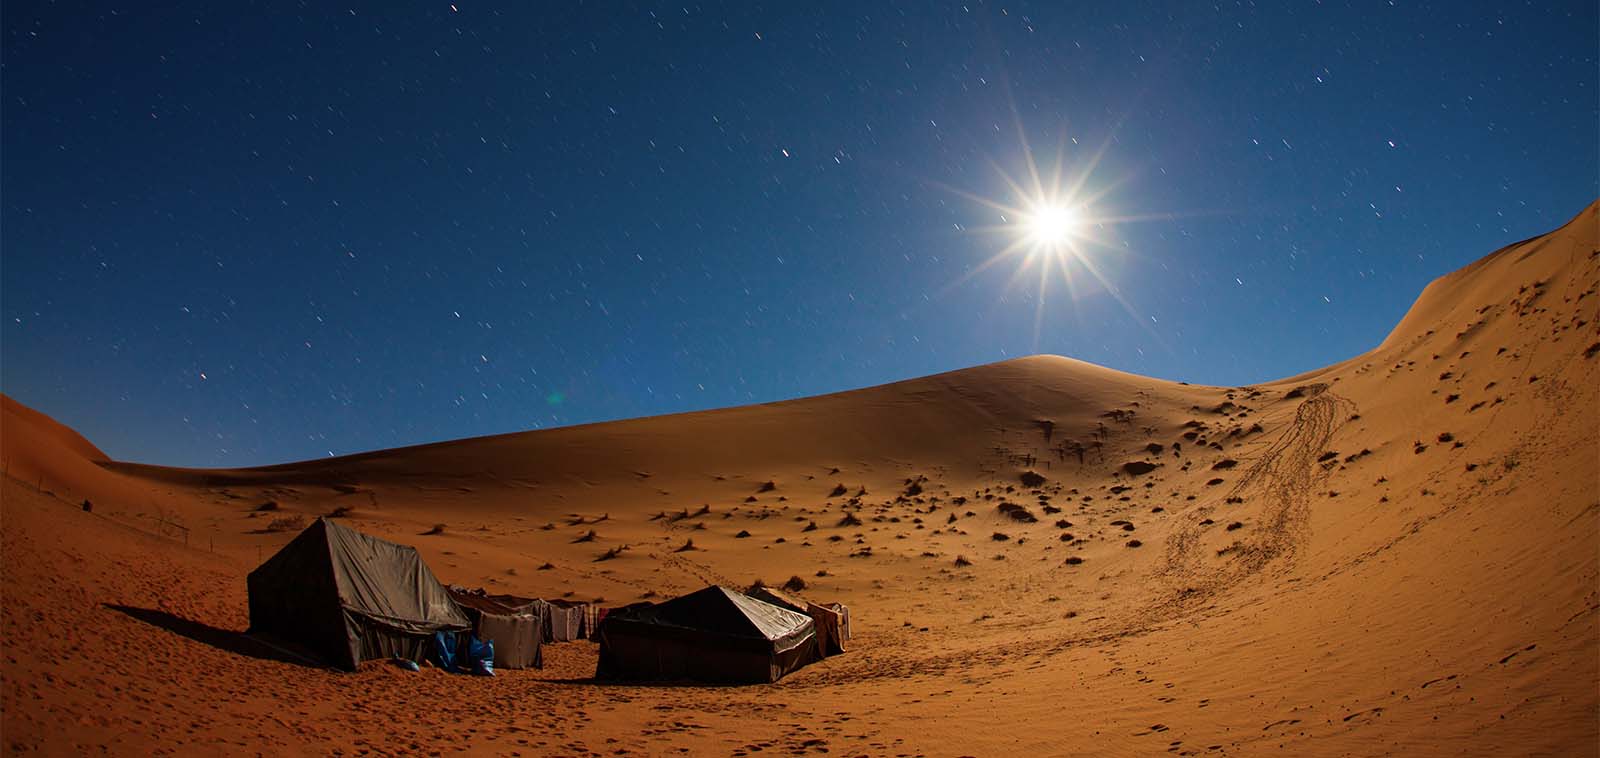 Image of a camp in a desert